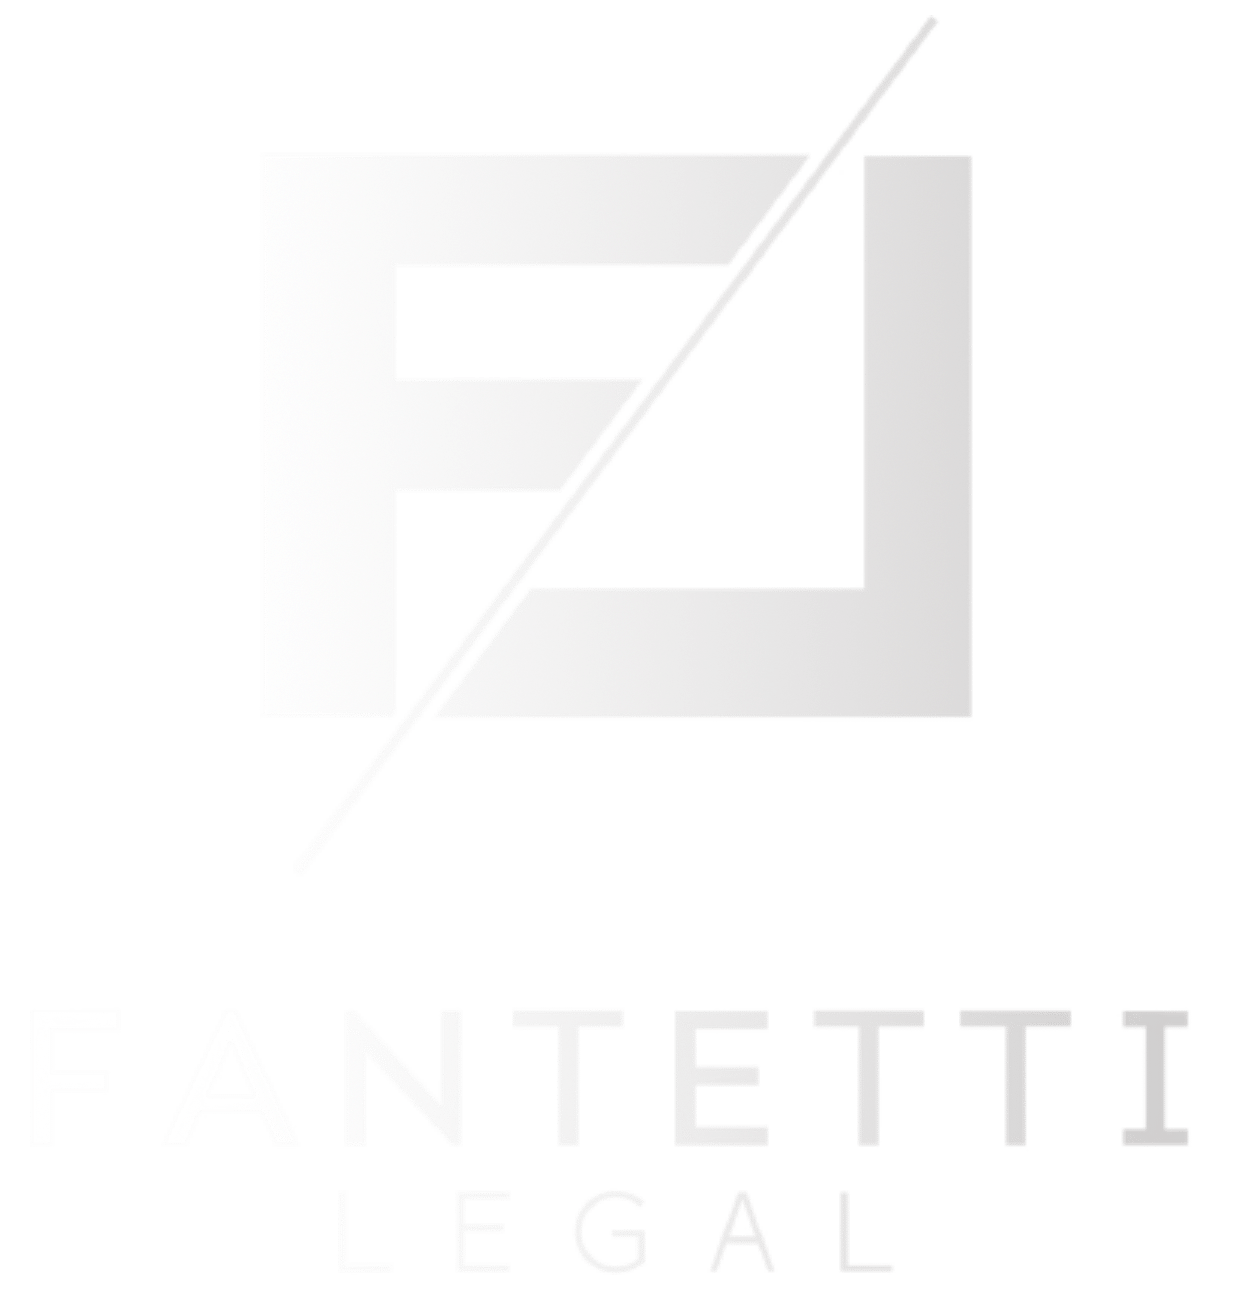 Fantetti Legal | Corporate Business Law Firm | Commerical Business Attorneys  